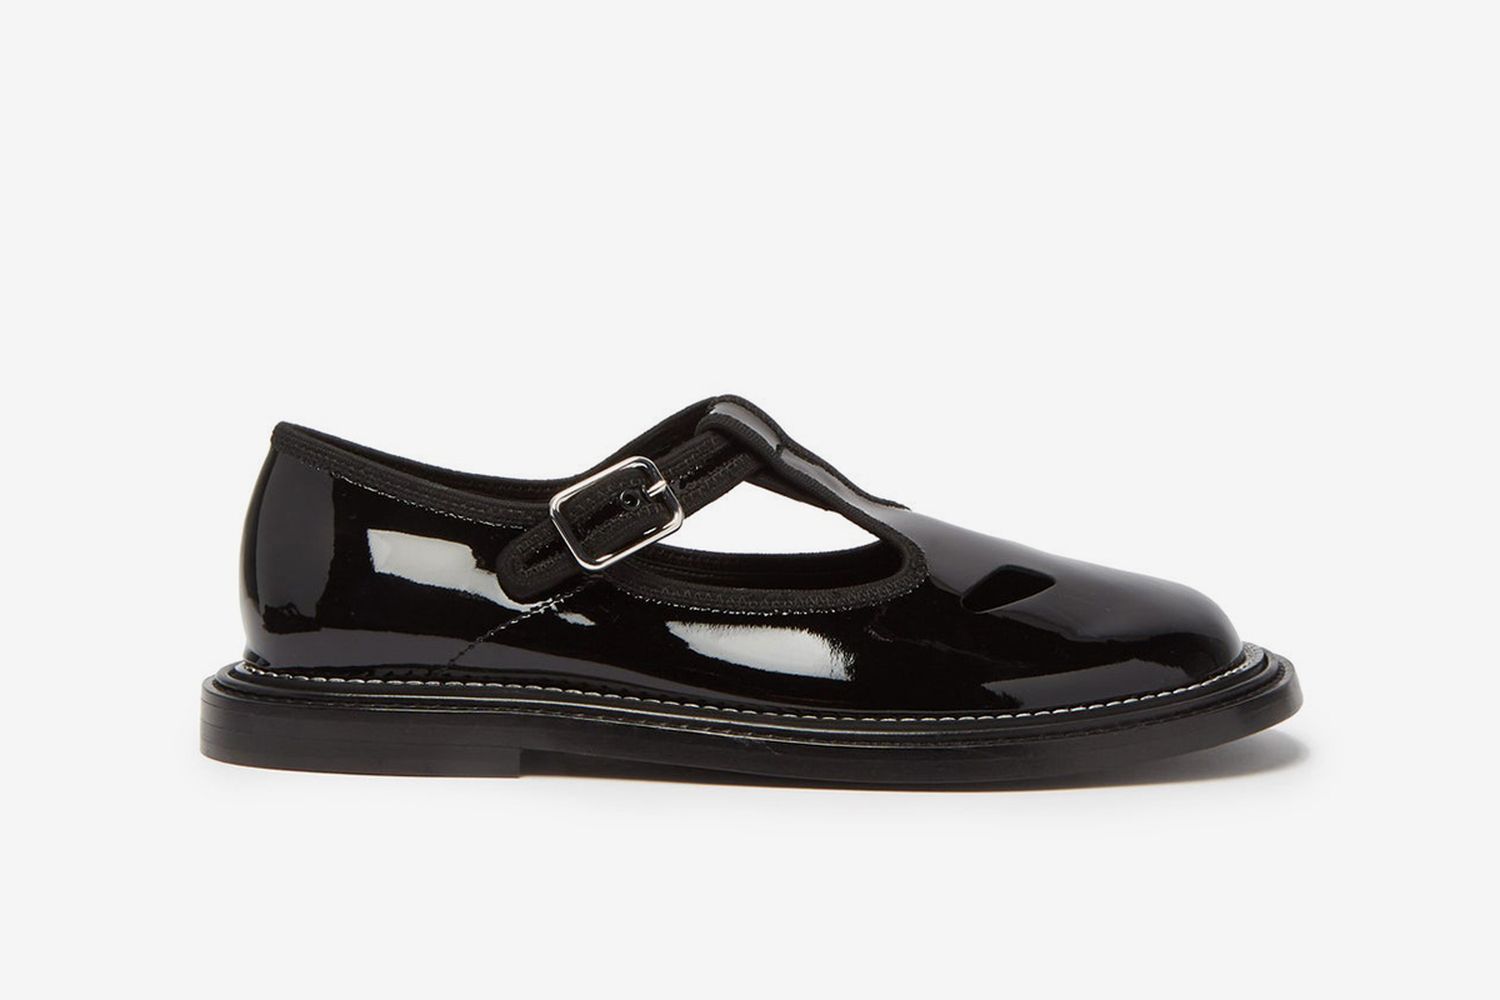 Alannis T-Bar Patent-Leather Mary Jane Flats